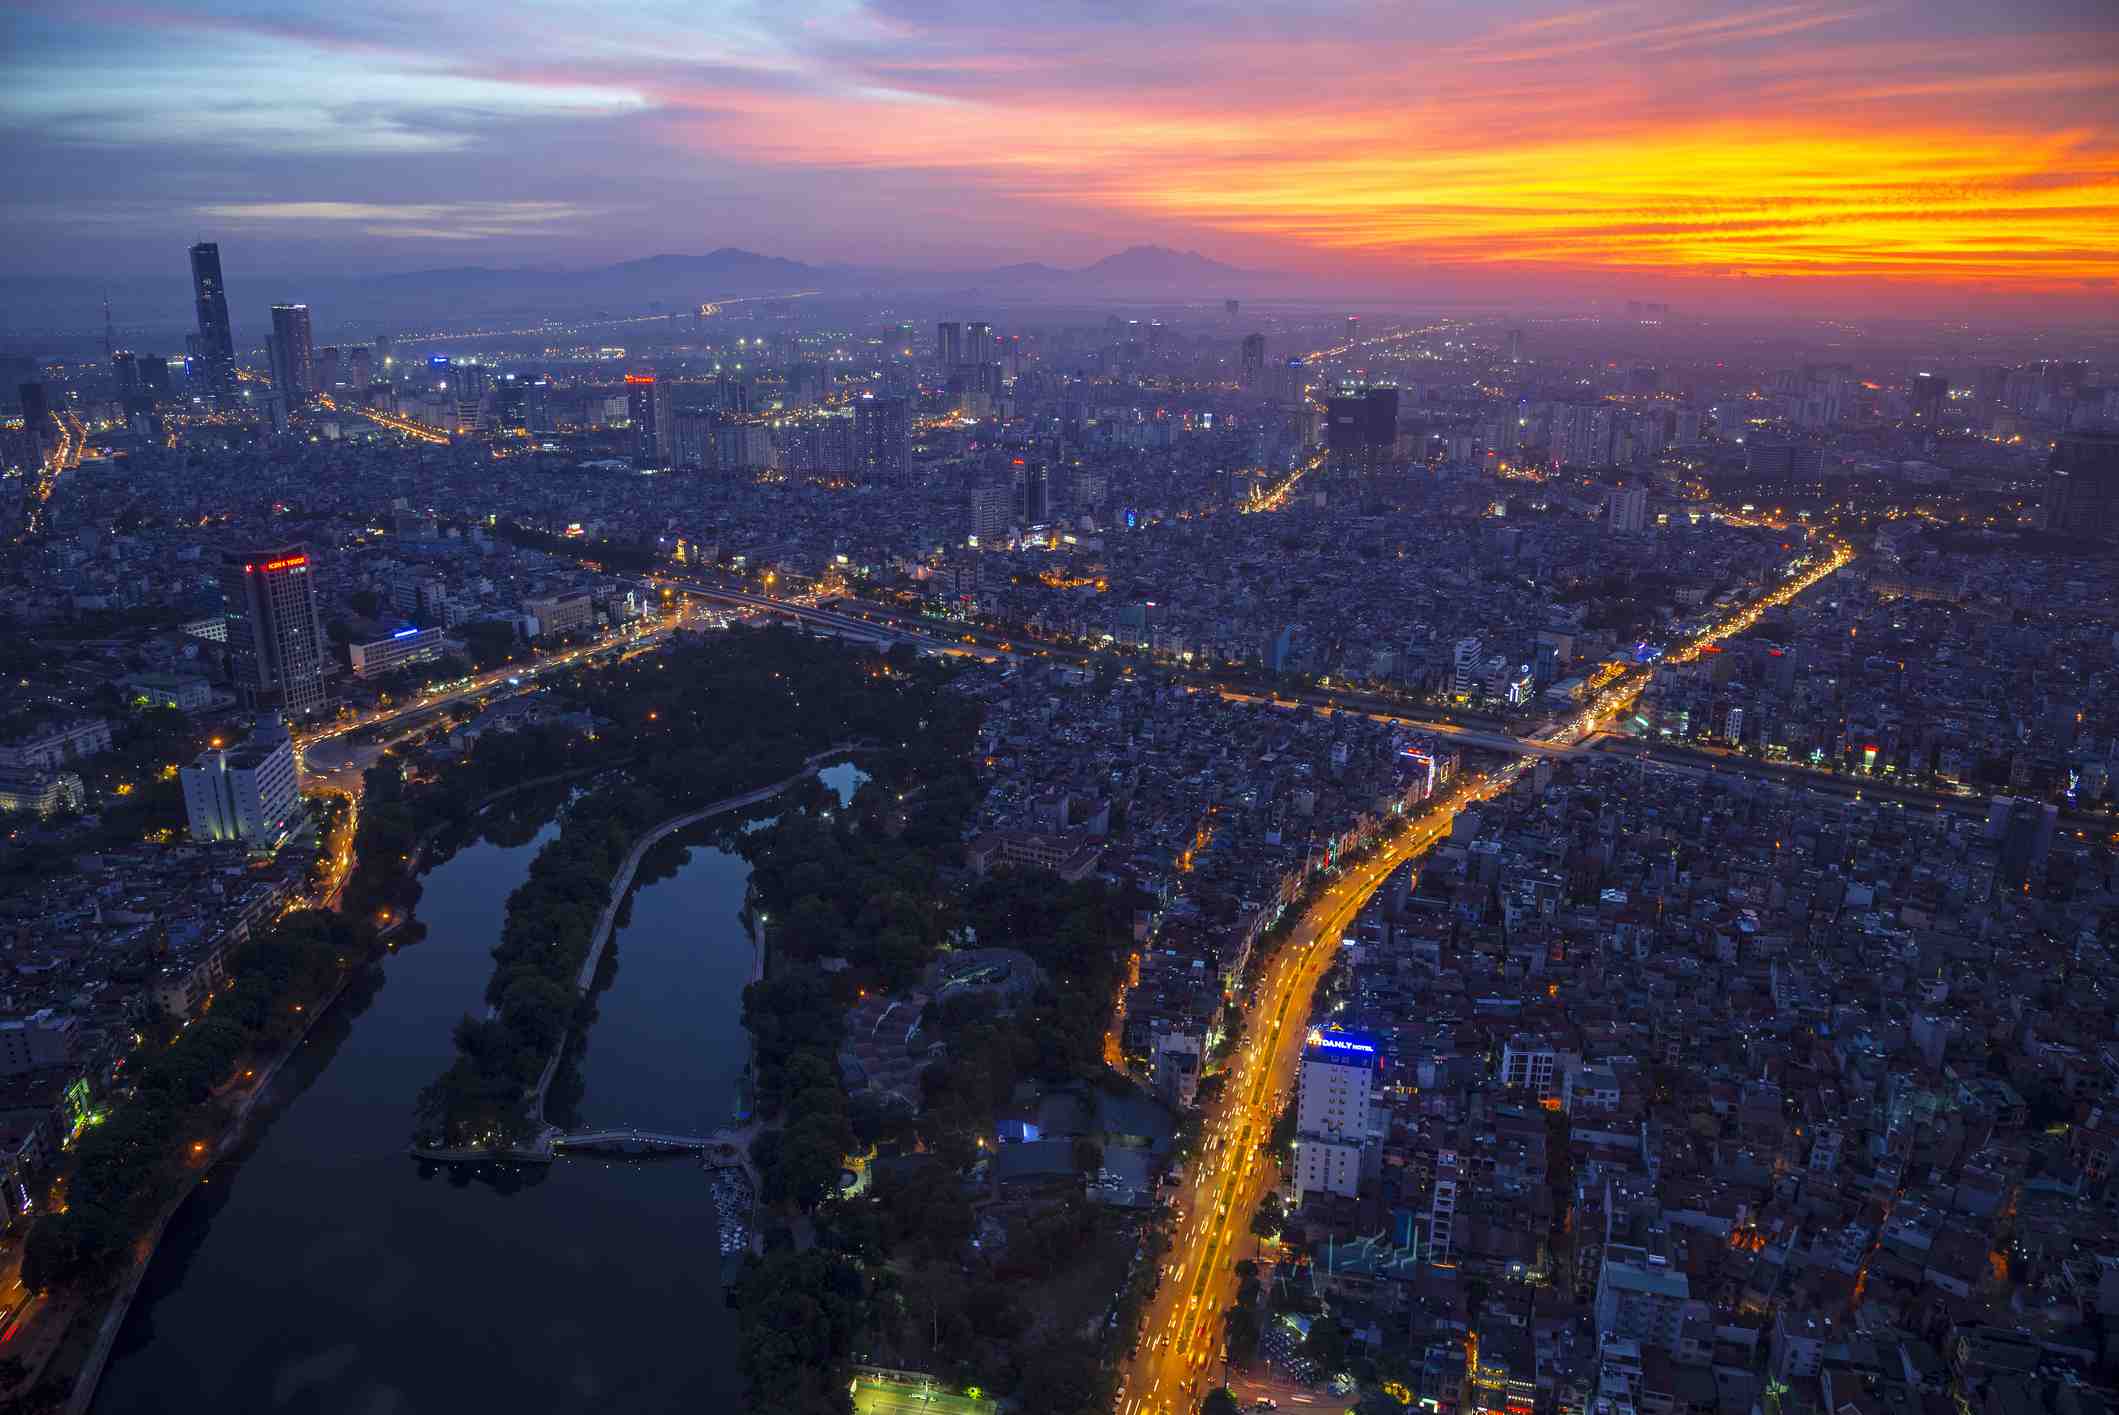 Explore the beauty of Hanoi through its top tourist attractions.